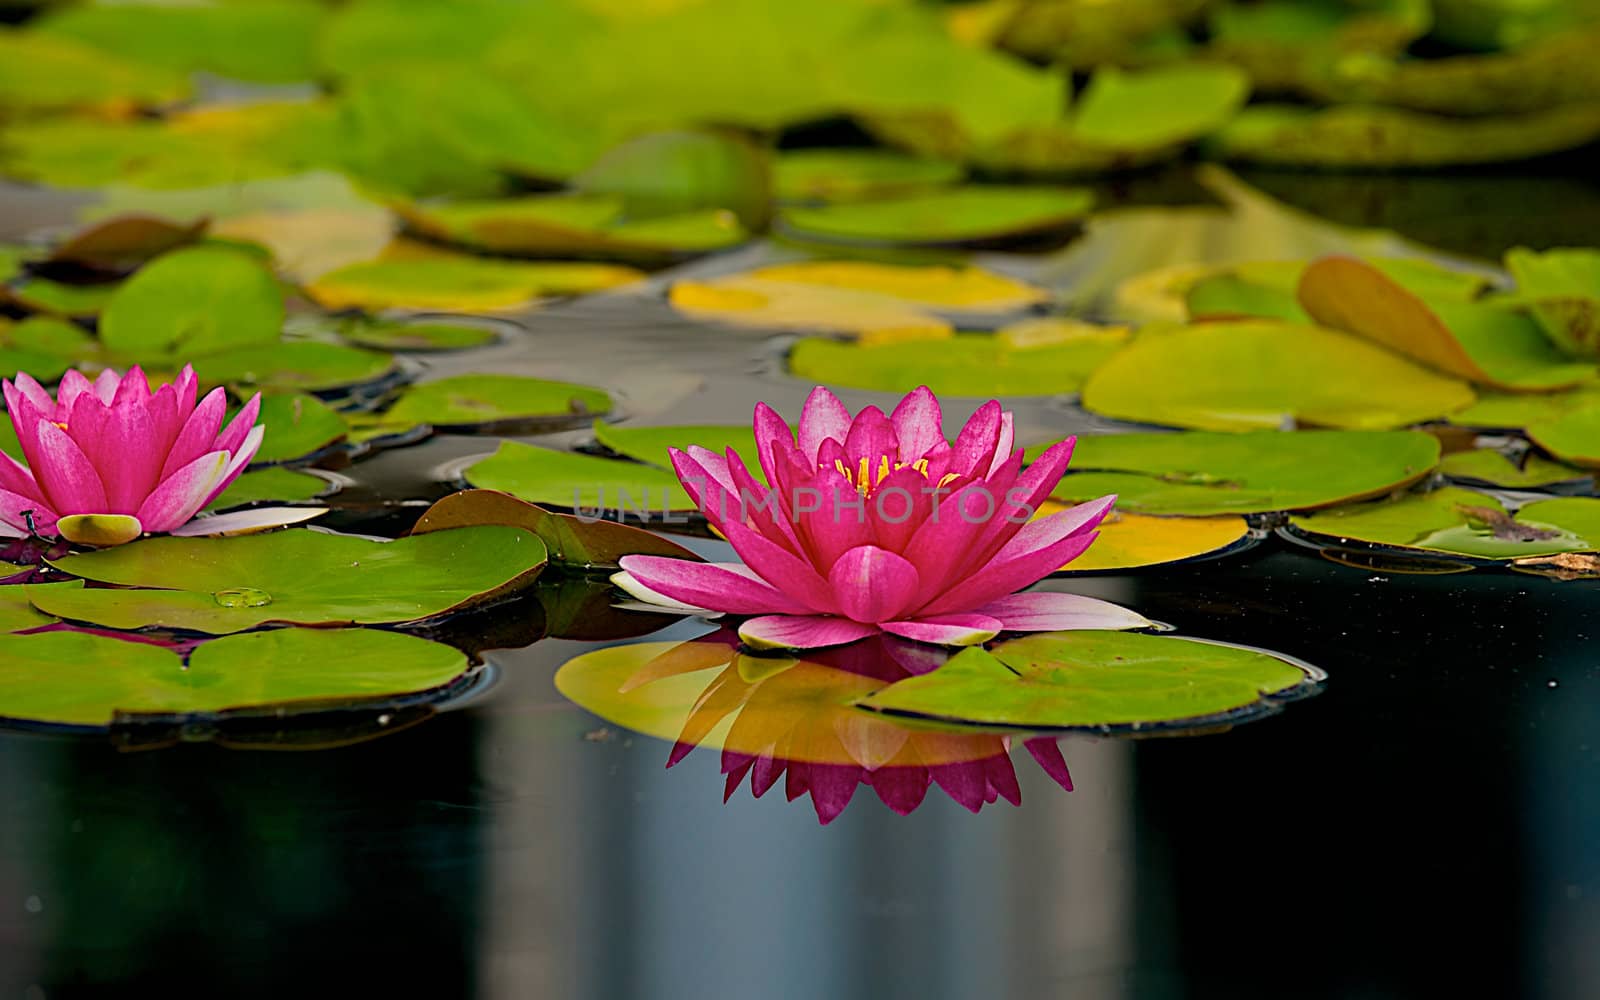 Pink flowers and lilly-pads floating in pond with reflections.